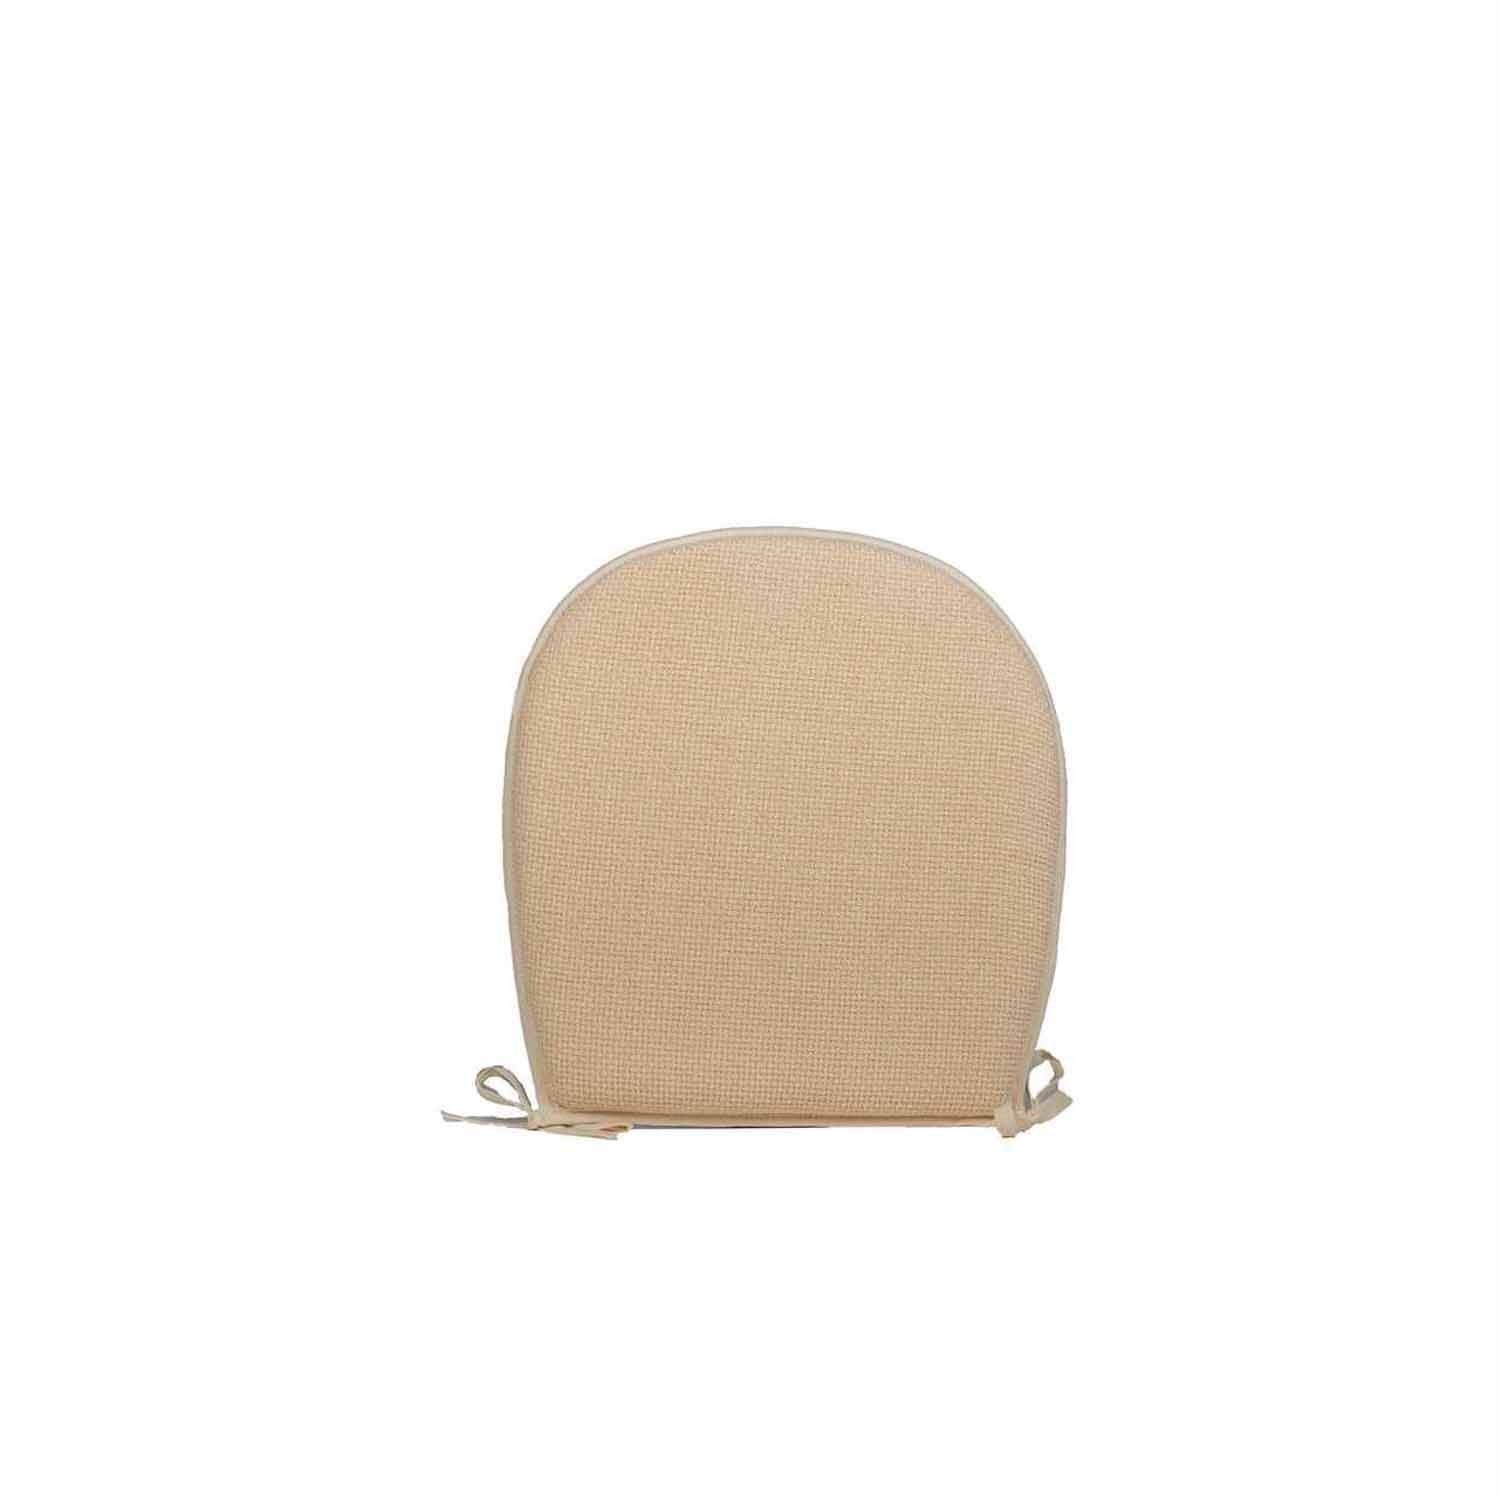 Home &amp; Interiors Chenille Chair Pad - Natural 1 Shaws Department Stores